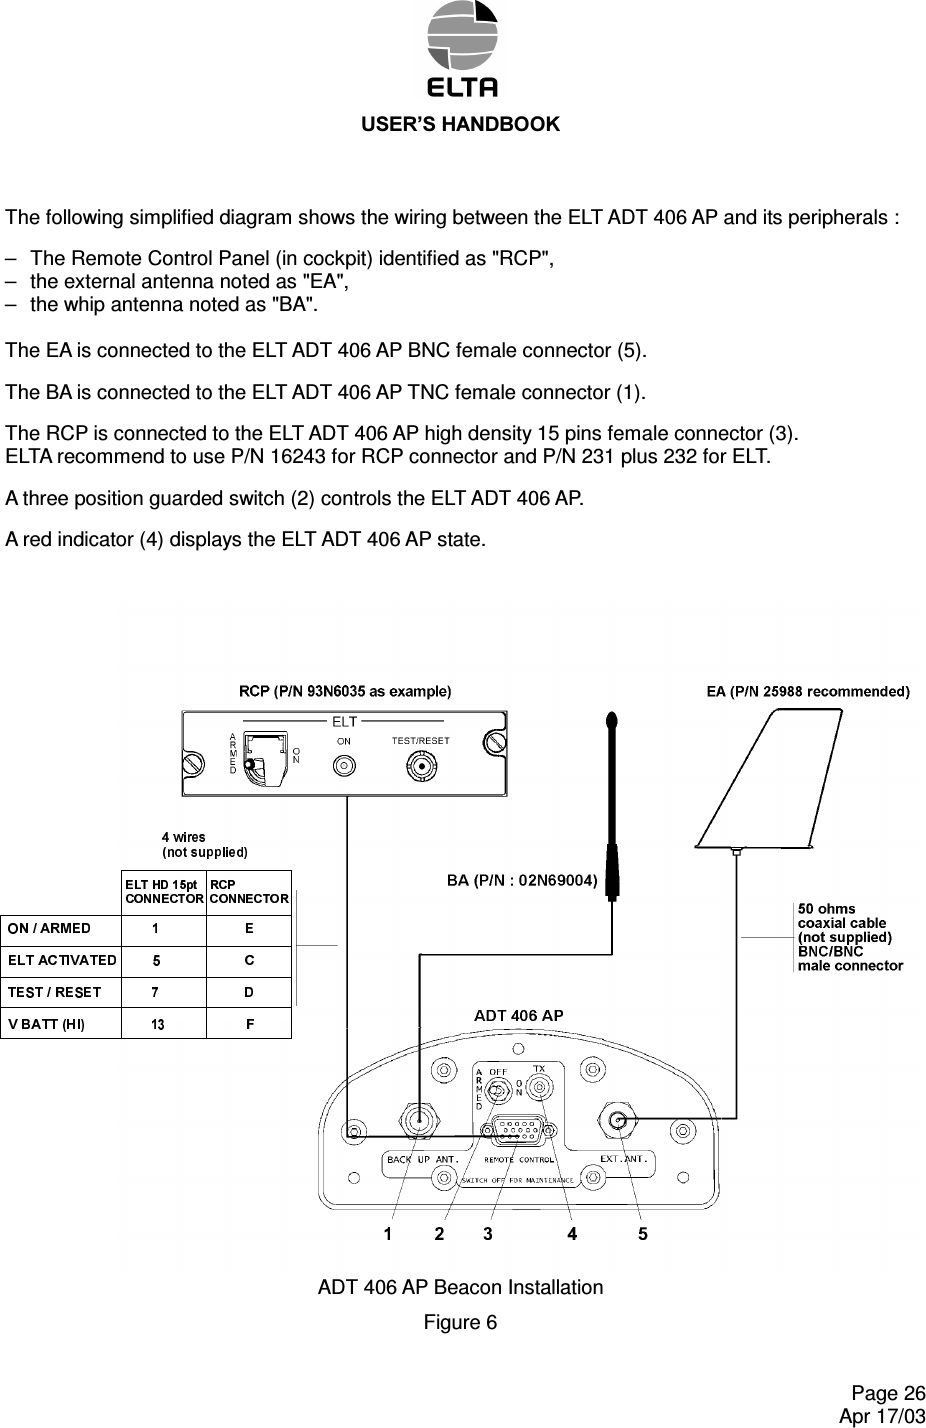 86(5¶6+$1&apos;%22.    Page 26   Apr 17/03 The following simplified diagram shows the wiring between the ELT ADT 406 AP and its peripherals : –  The Remote Control Panel (in cockpit) identified as &quot;RCP&quot;, –  the external antenna noted as &quot;EA&quot;, –  the whip antenna noted as &quot;BA&quot;.  The EA is connected to the ELT ADT 406 AP BNC female connector (5). The BA is connected to the ELT ADT 406 AP TNC female connector (1). The RCP is connected to the ELT ADT 406 AP high density 15 pins female connector (3). ELTA recommend to use P/N 16243 for RCP connector and P/N 231 plus 232 for ELT. A three position guarded switch (2) controls the ELT ADT 406 AP. A red indicator (4) displays the ELT ADT 406 AP state. ADT 406 AP Beacon Installation  Figure 6  